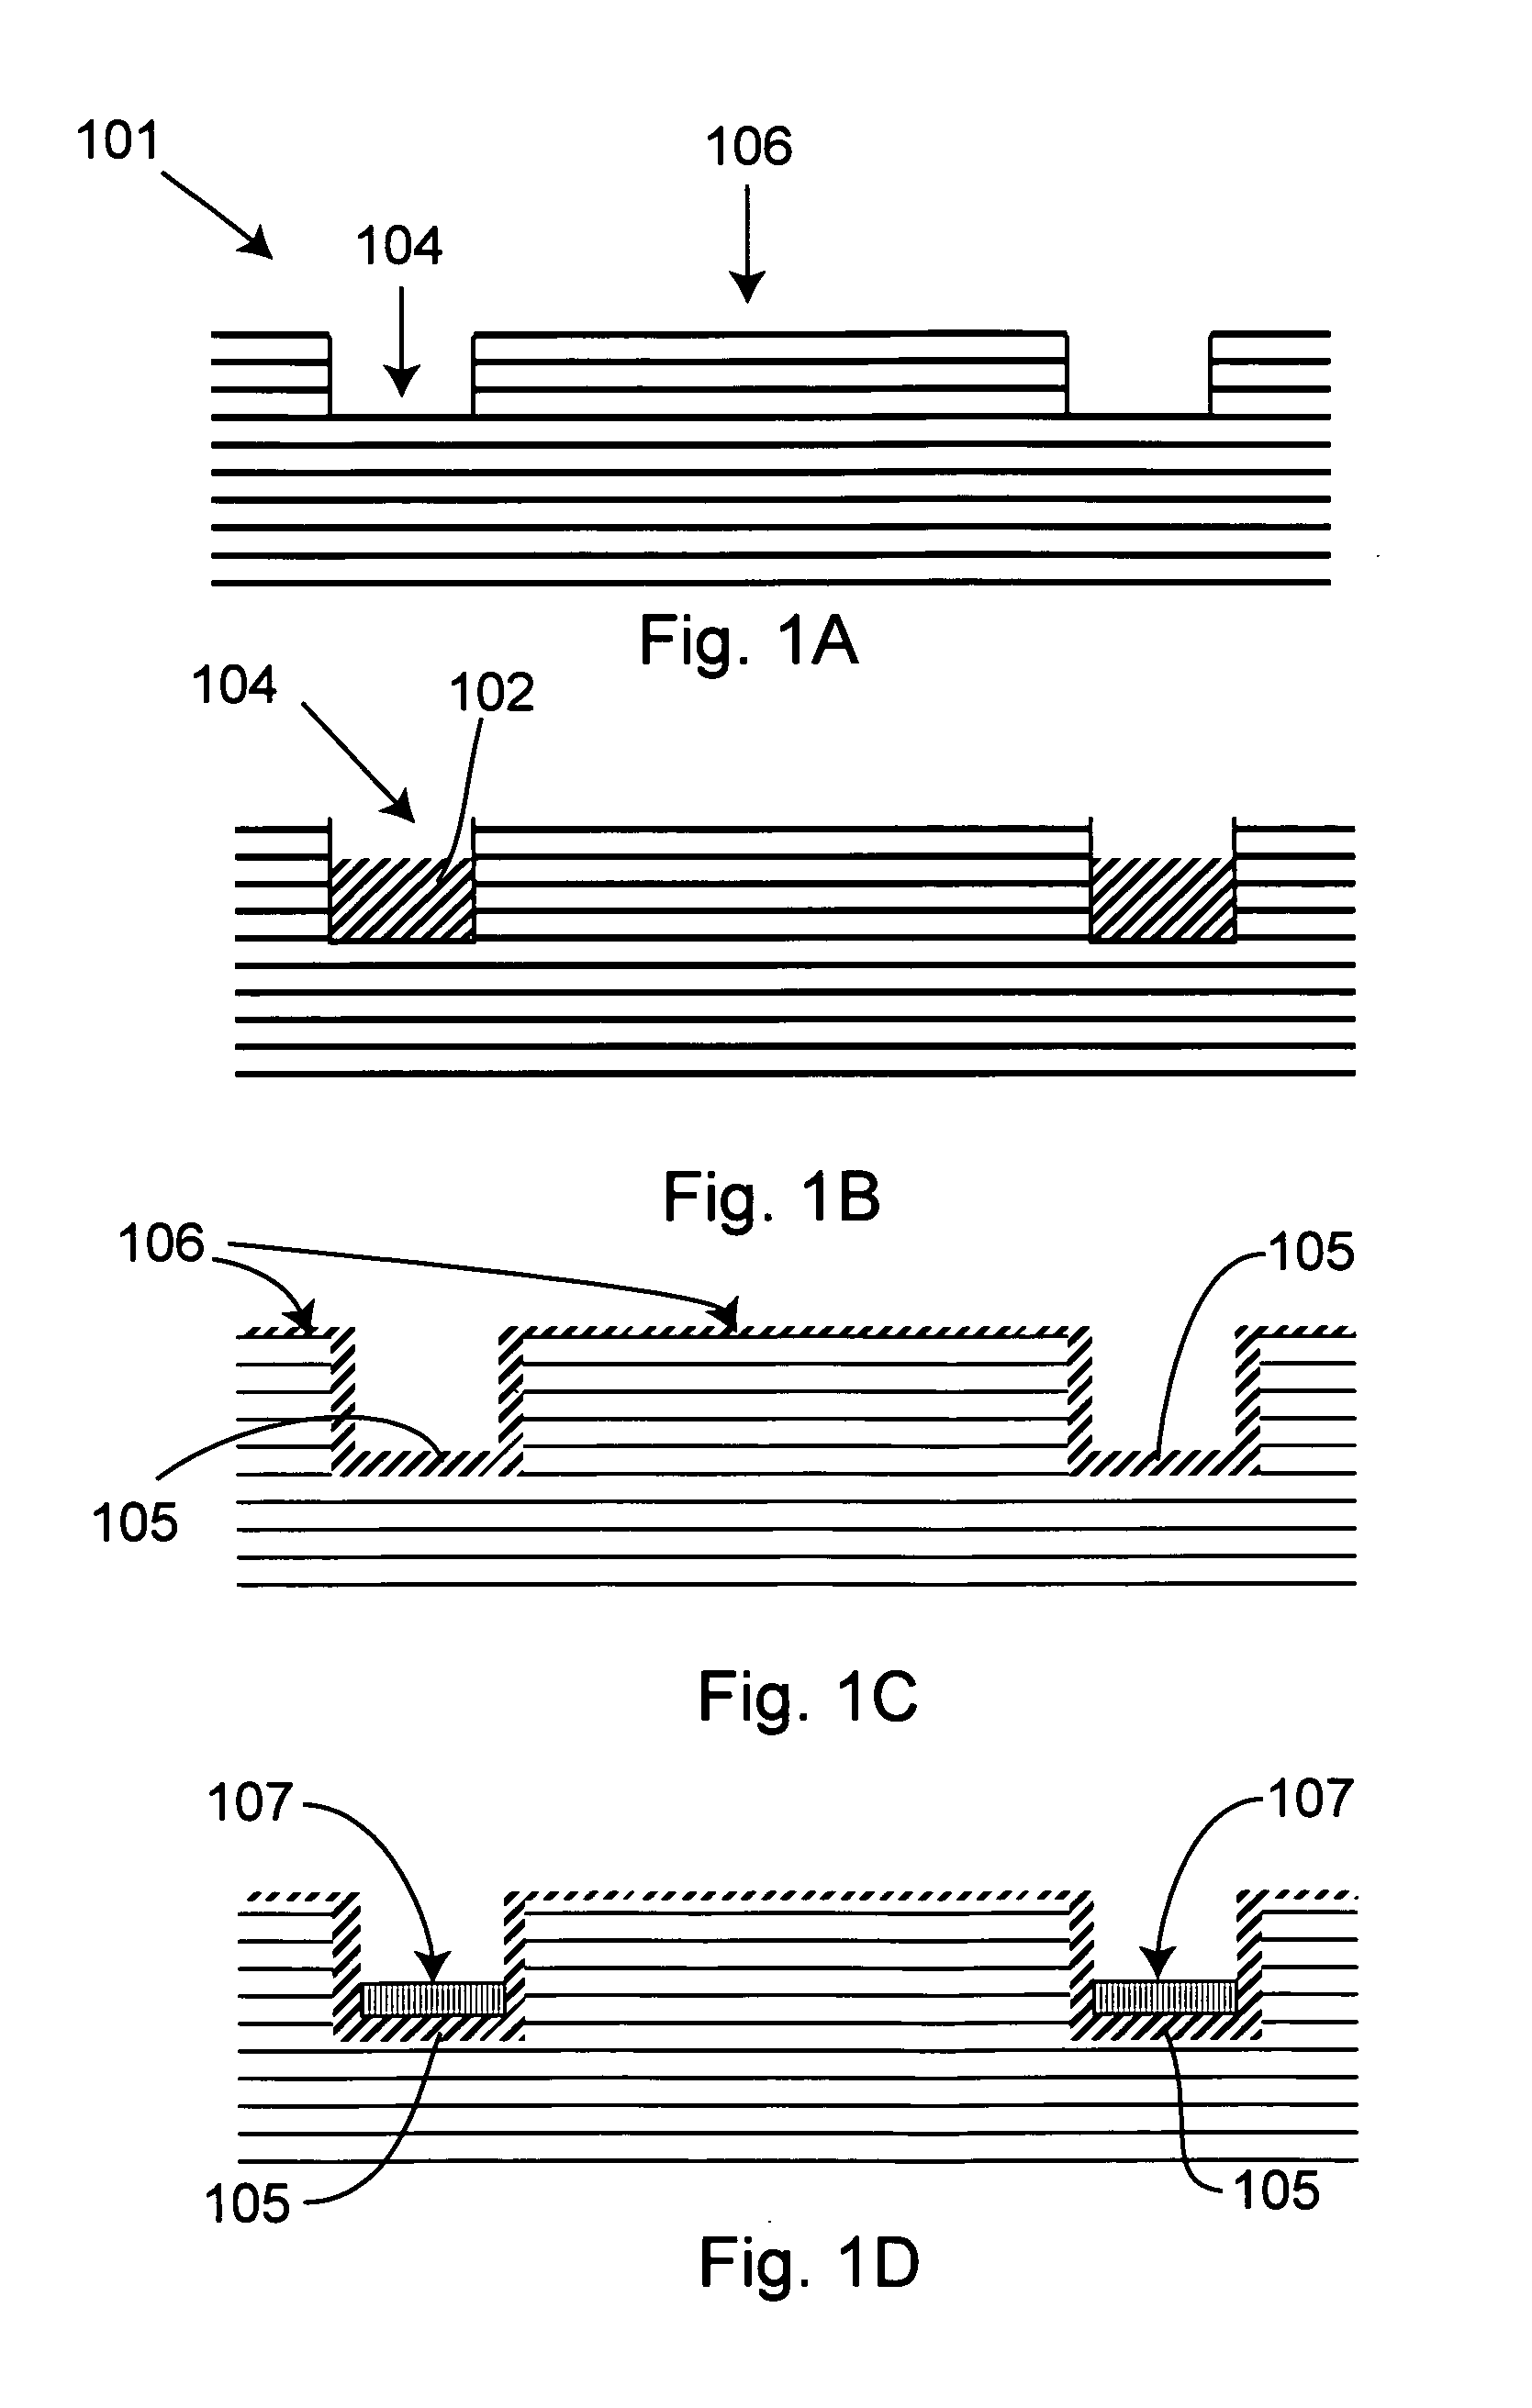 Methods to pattern diffusion layers in solar cells and solar cells made by such methods